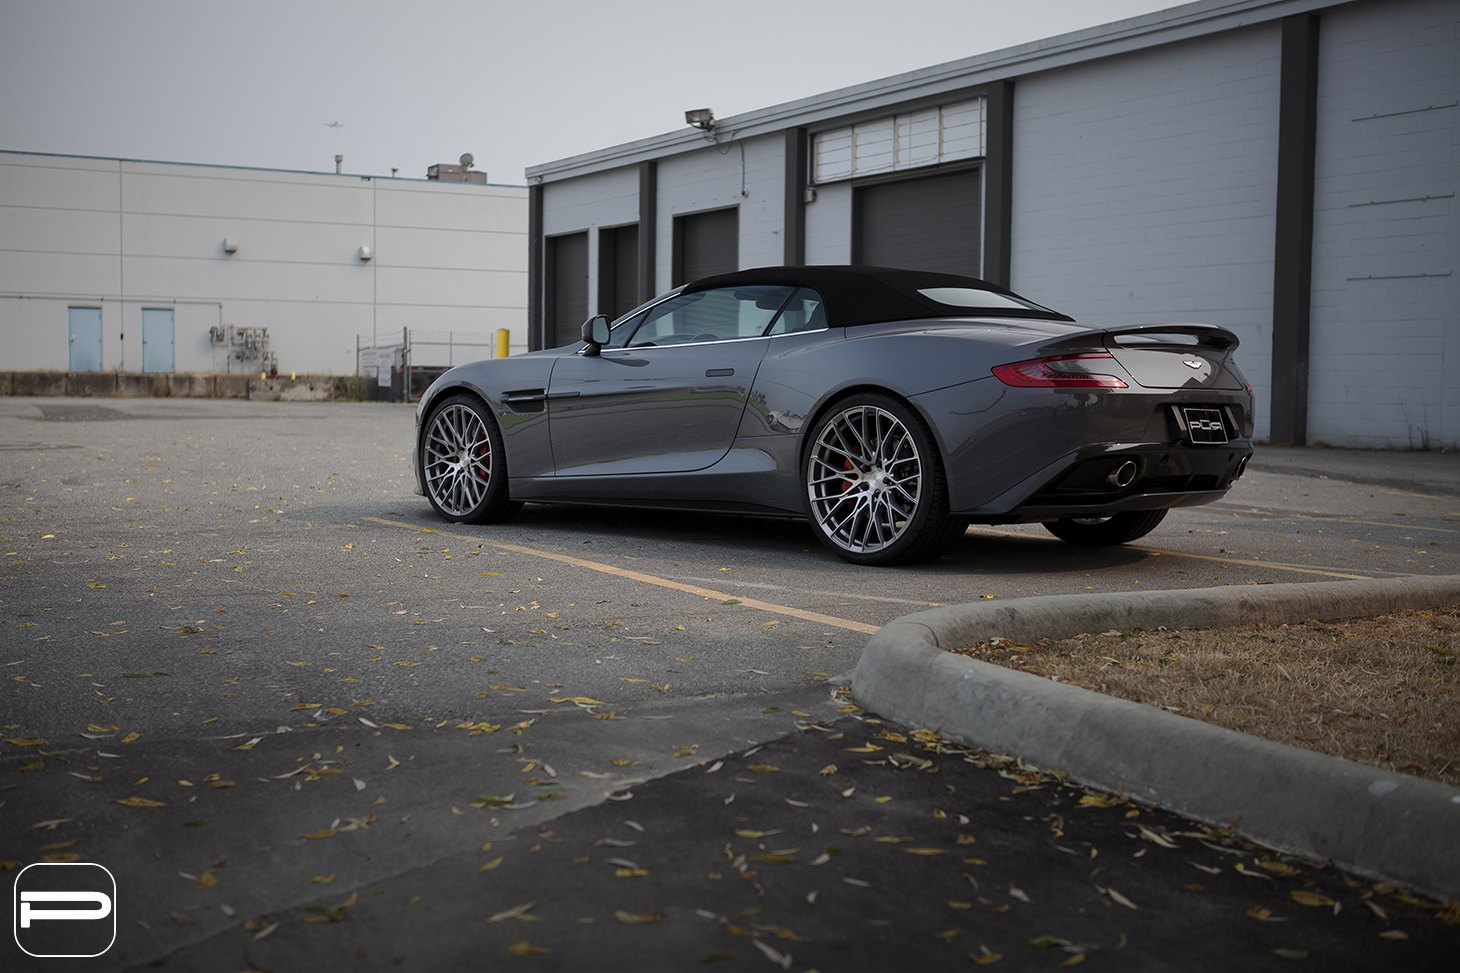 Aftermarket Rear Diffuser on Gray Aston Martin Vanquish - Photo by PUR Wheels